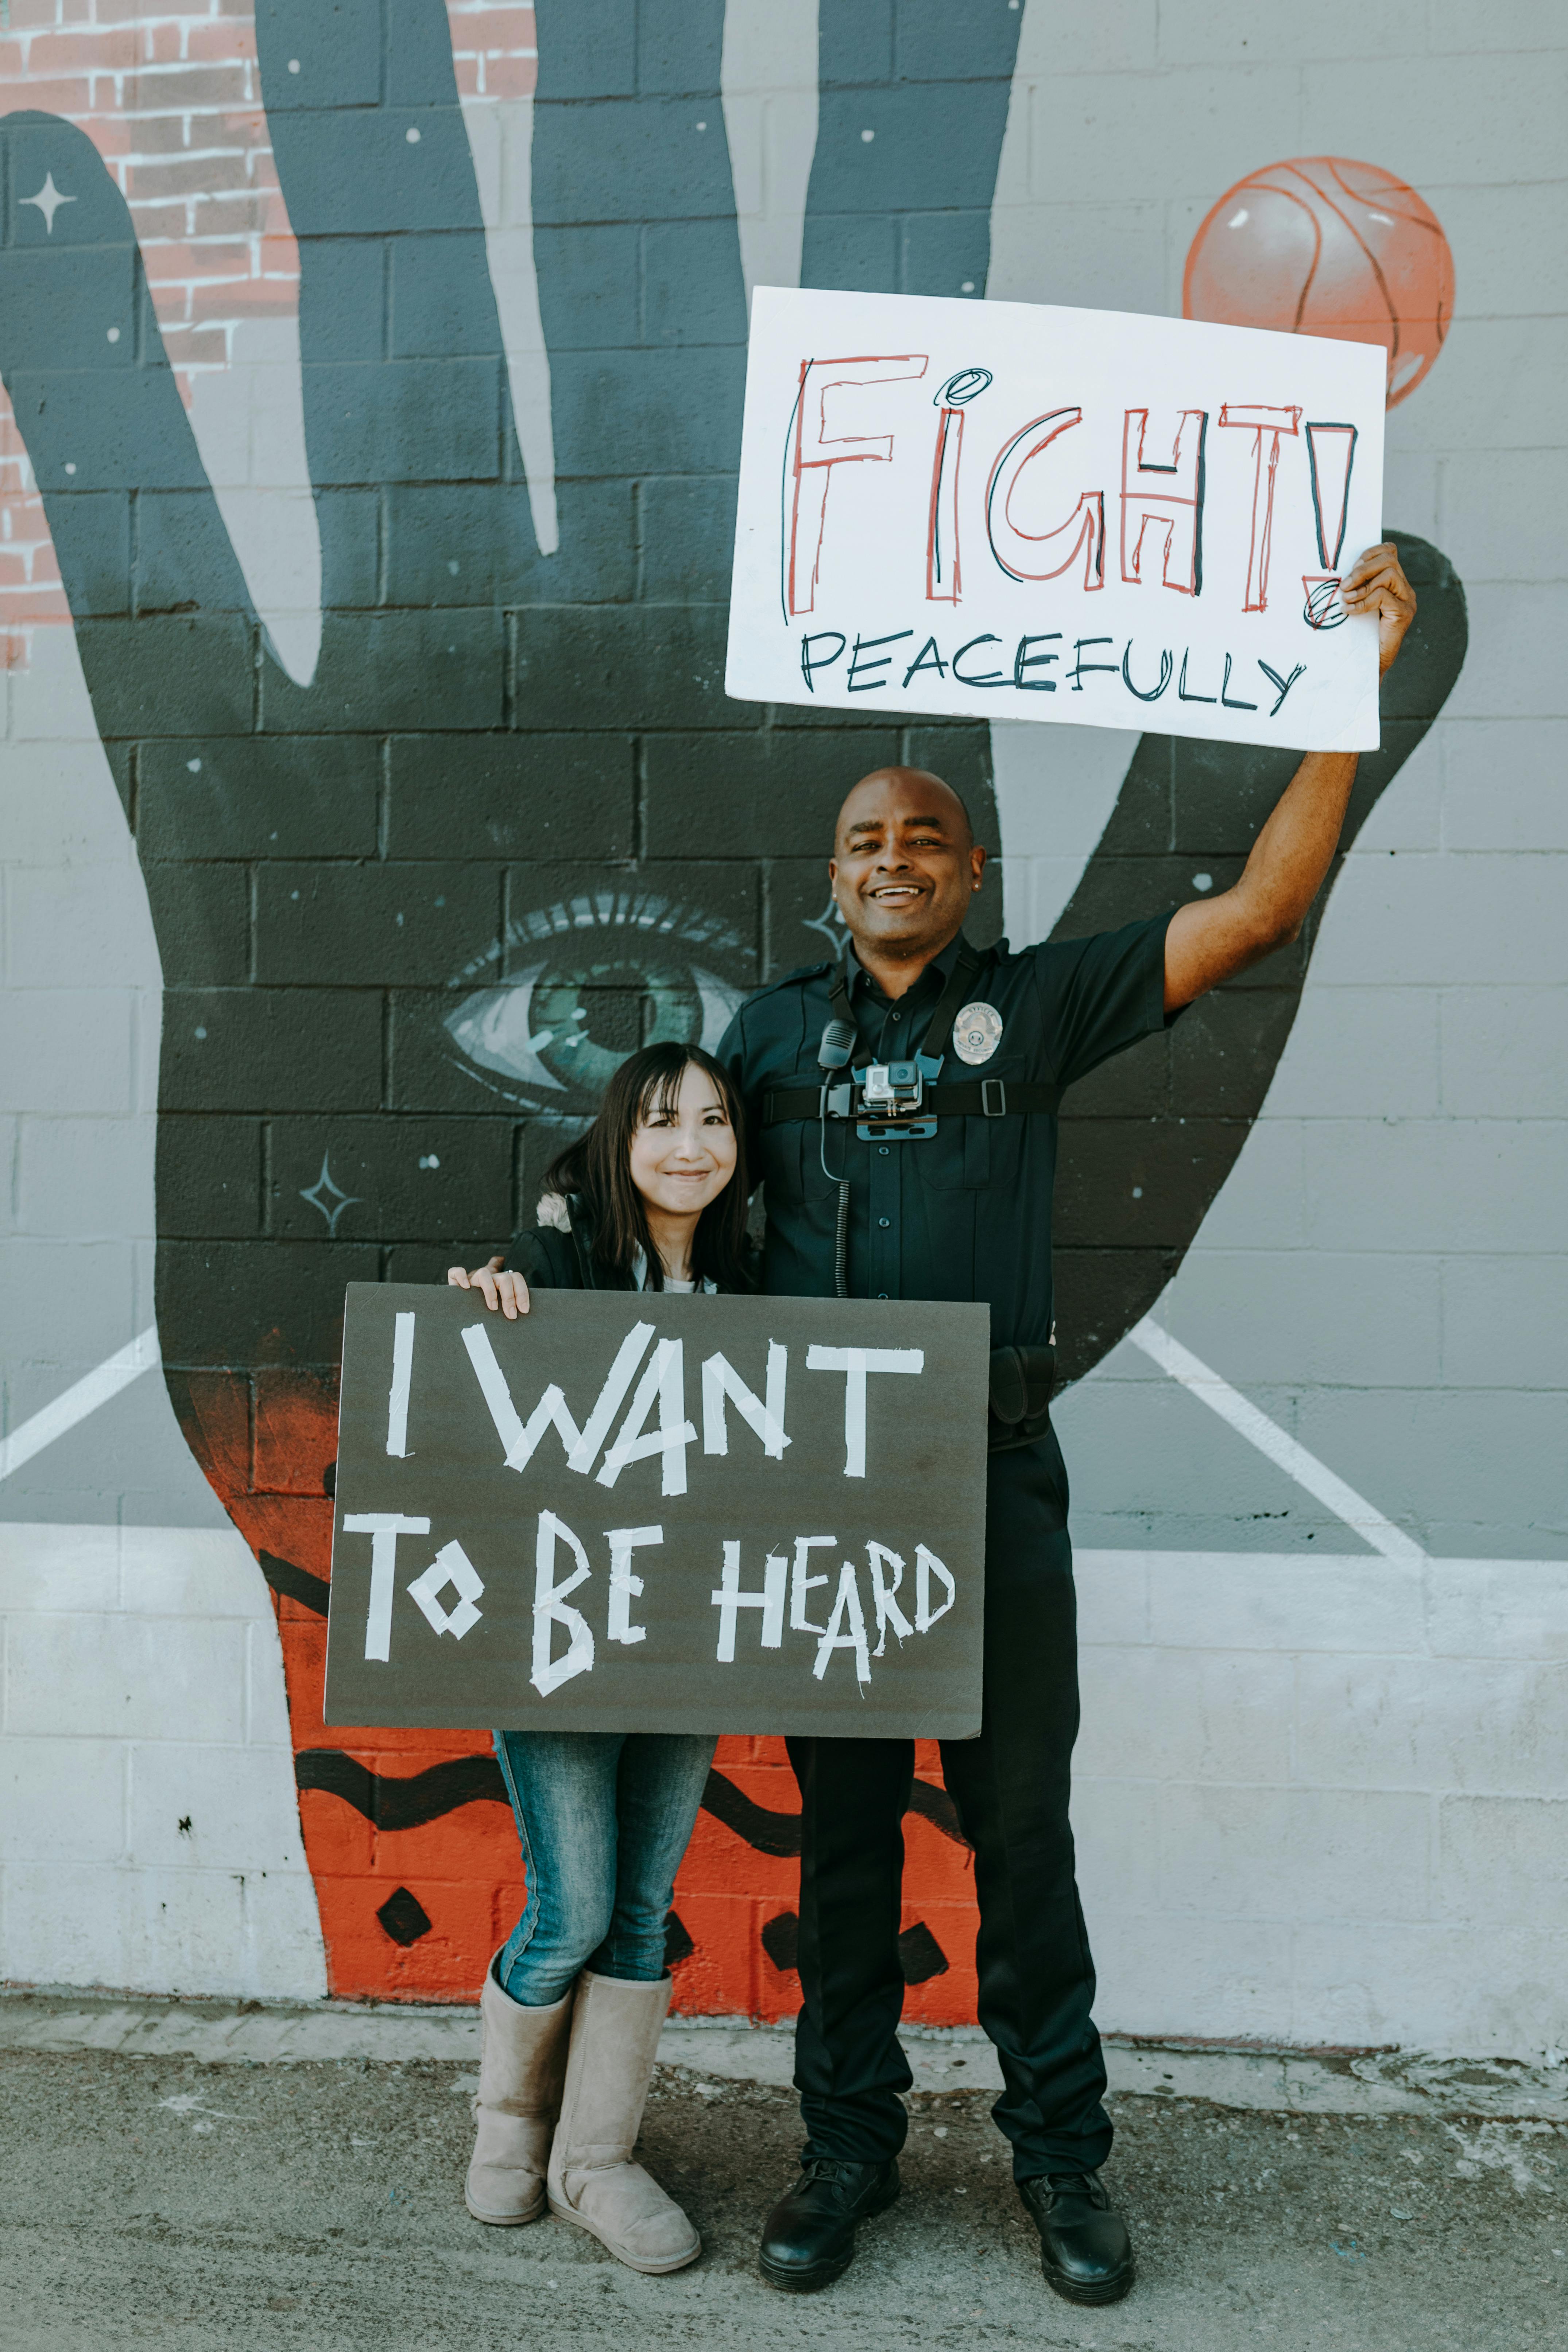 a policeman and woman holding protest banners